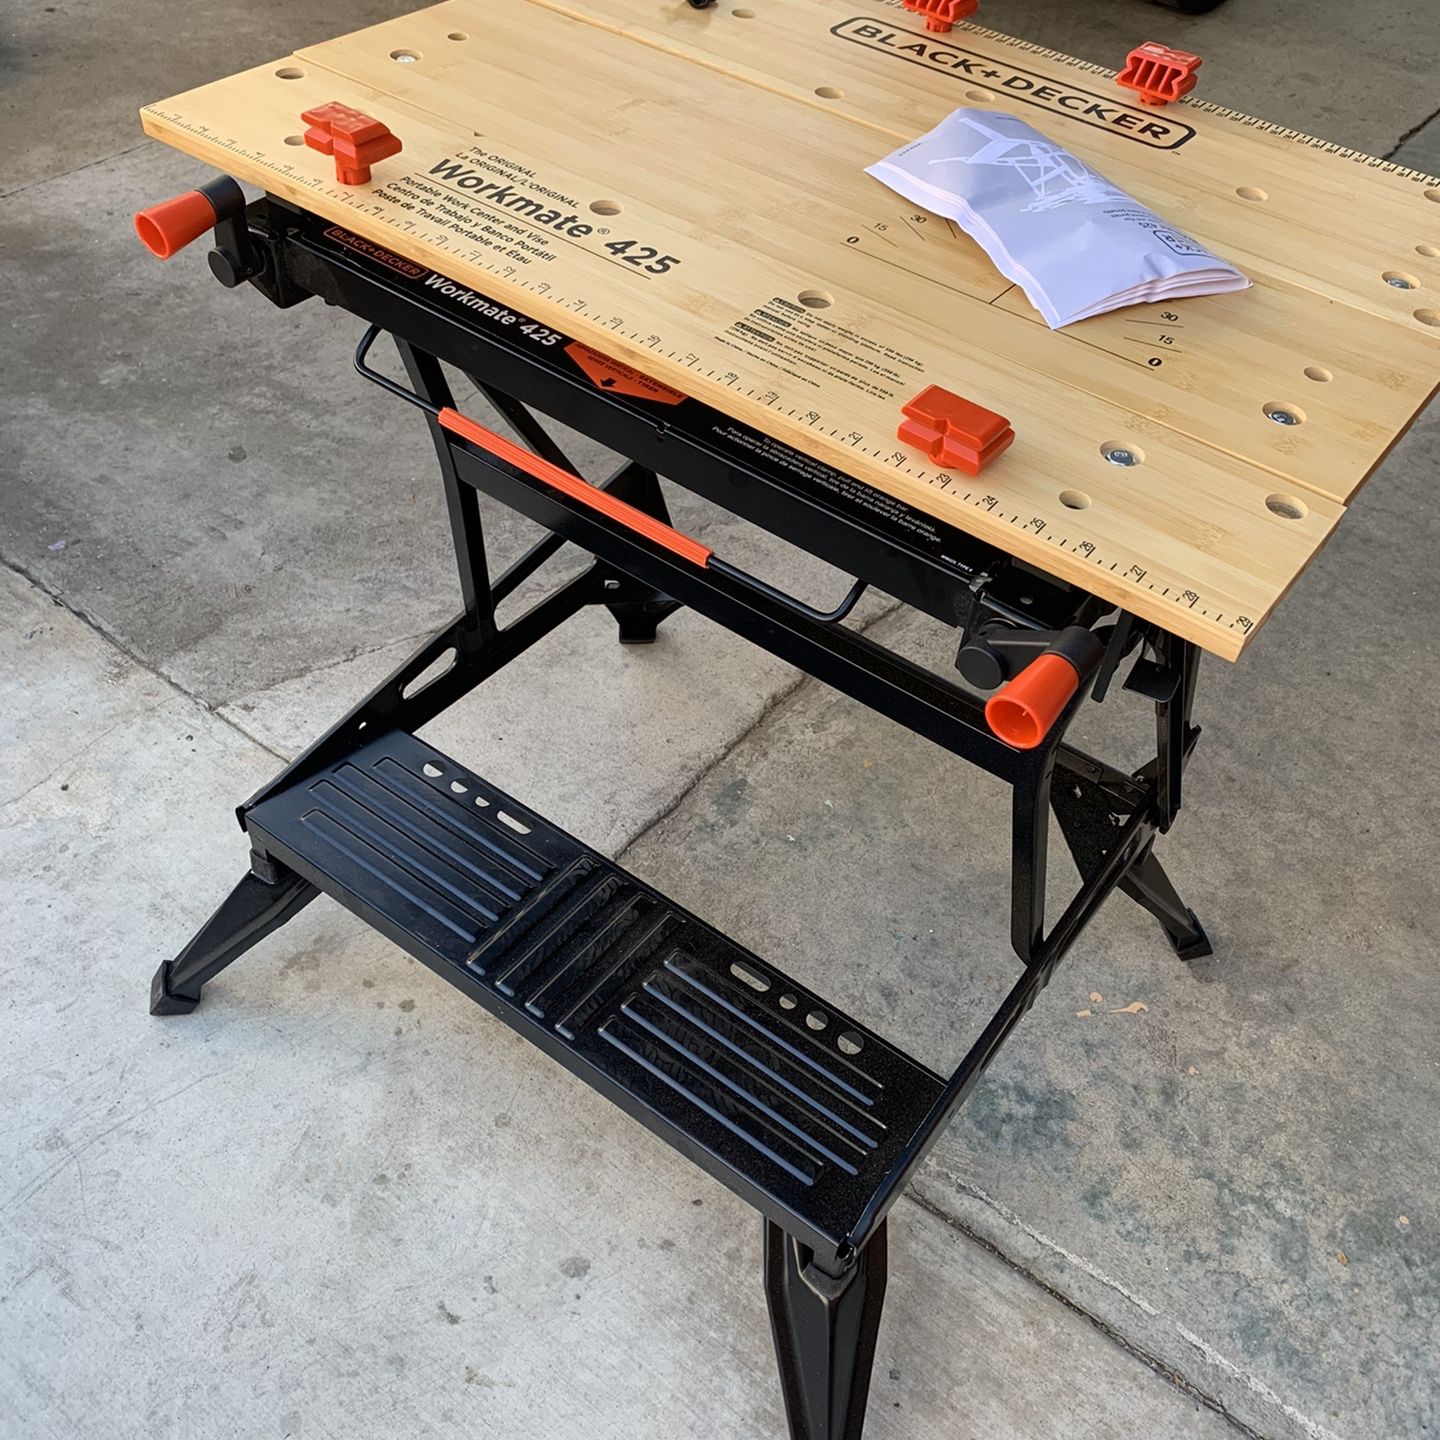 Black and decker workmate 550 for Sale in Charlotte, NC - OfferUp